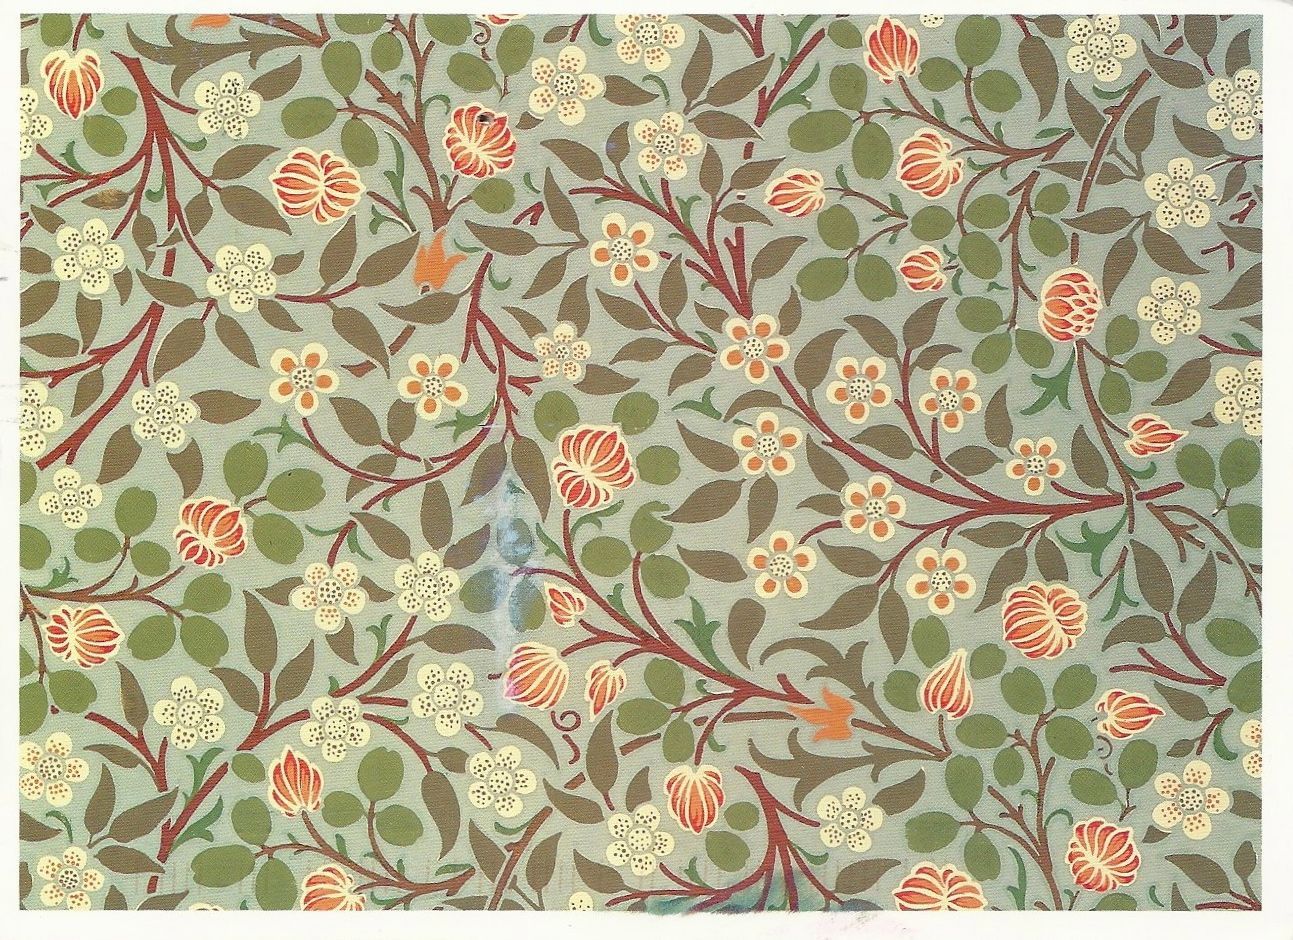 Arts and Crafts Movement- Floral pattern. William morris art, William morris wallpaper, Morris wallpaper